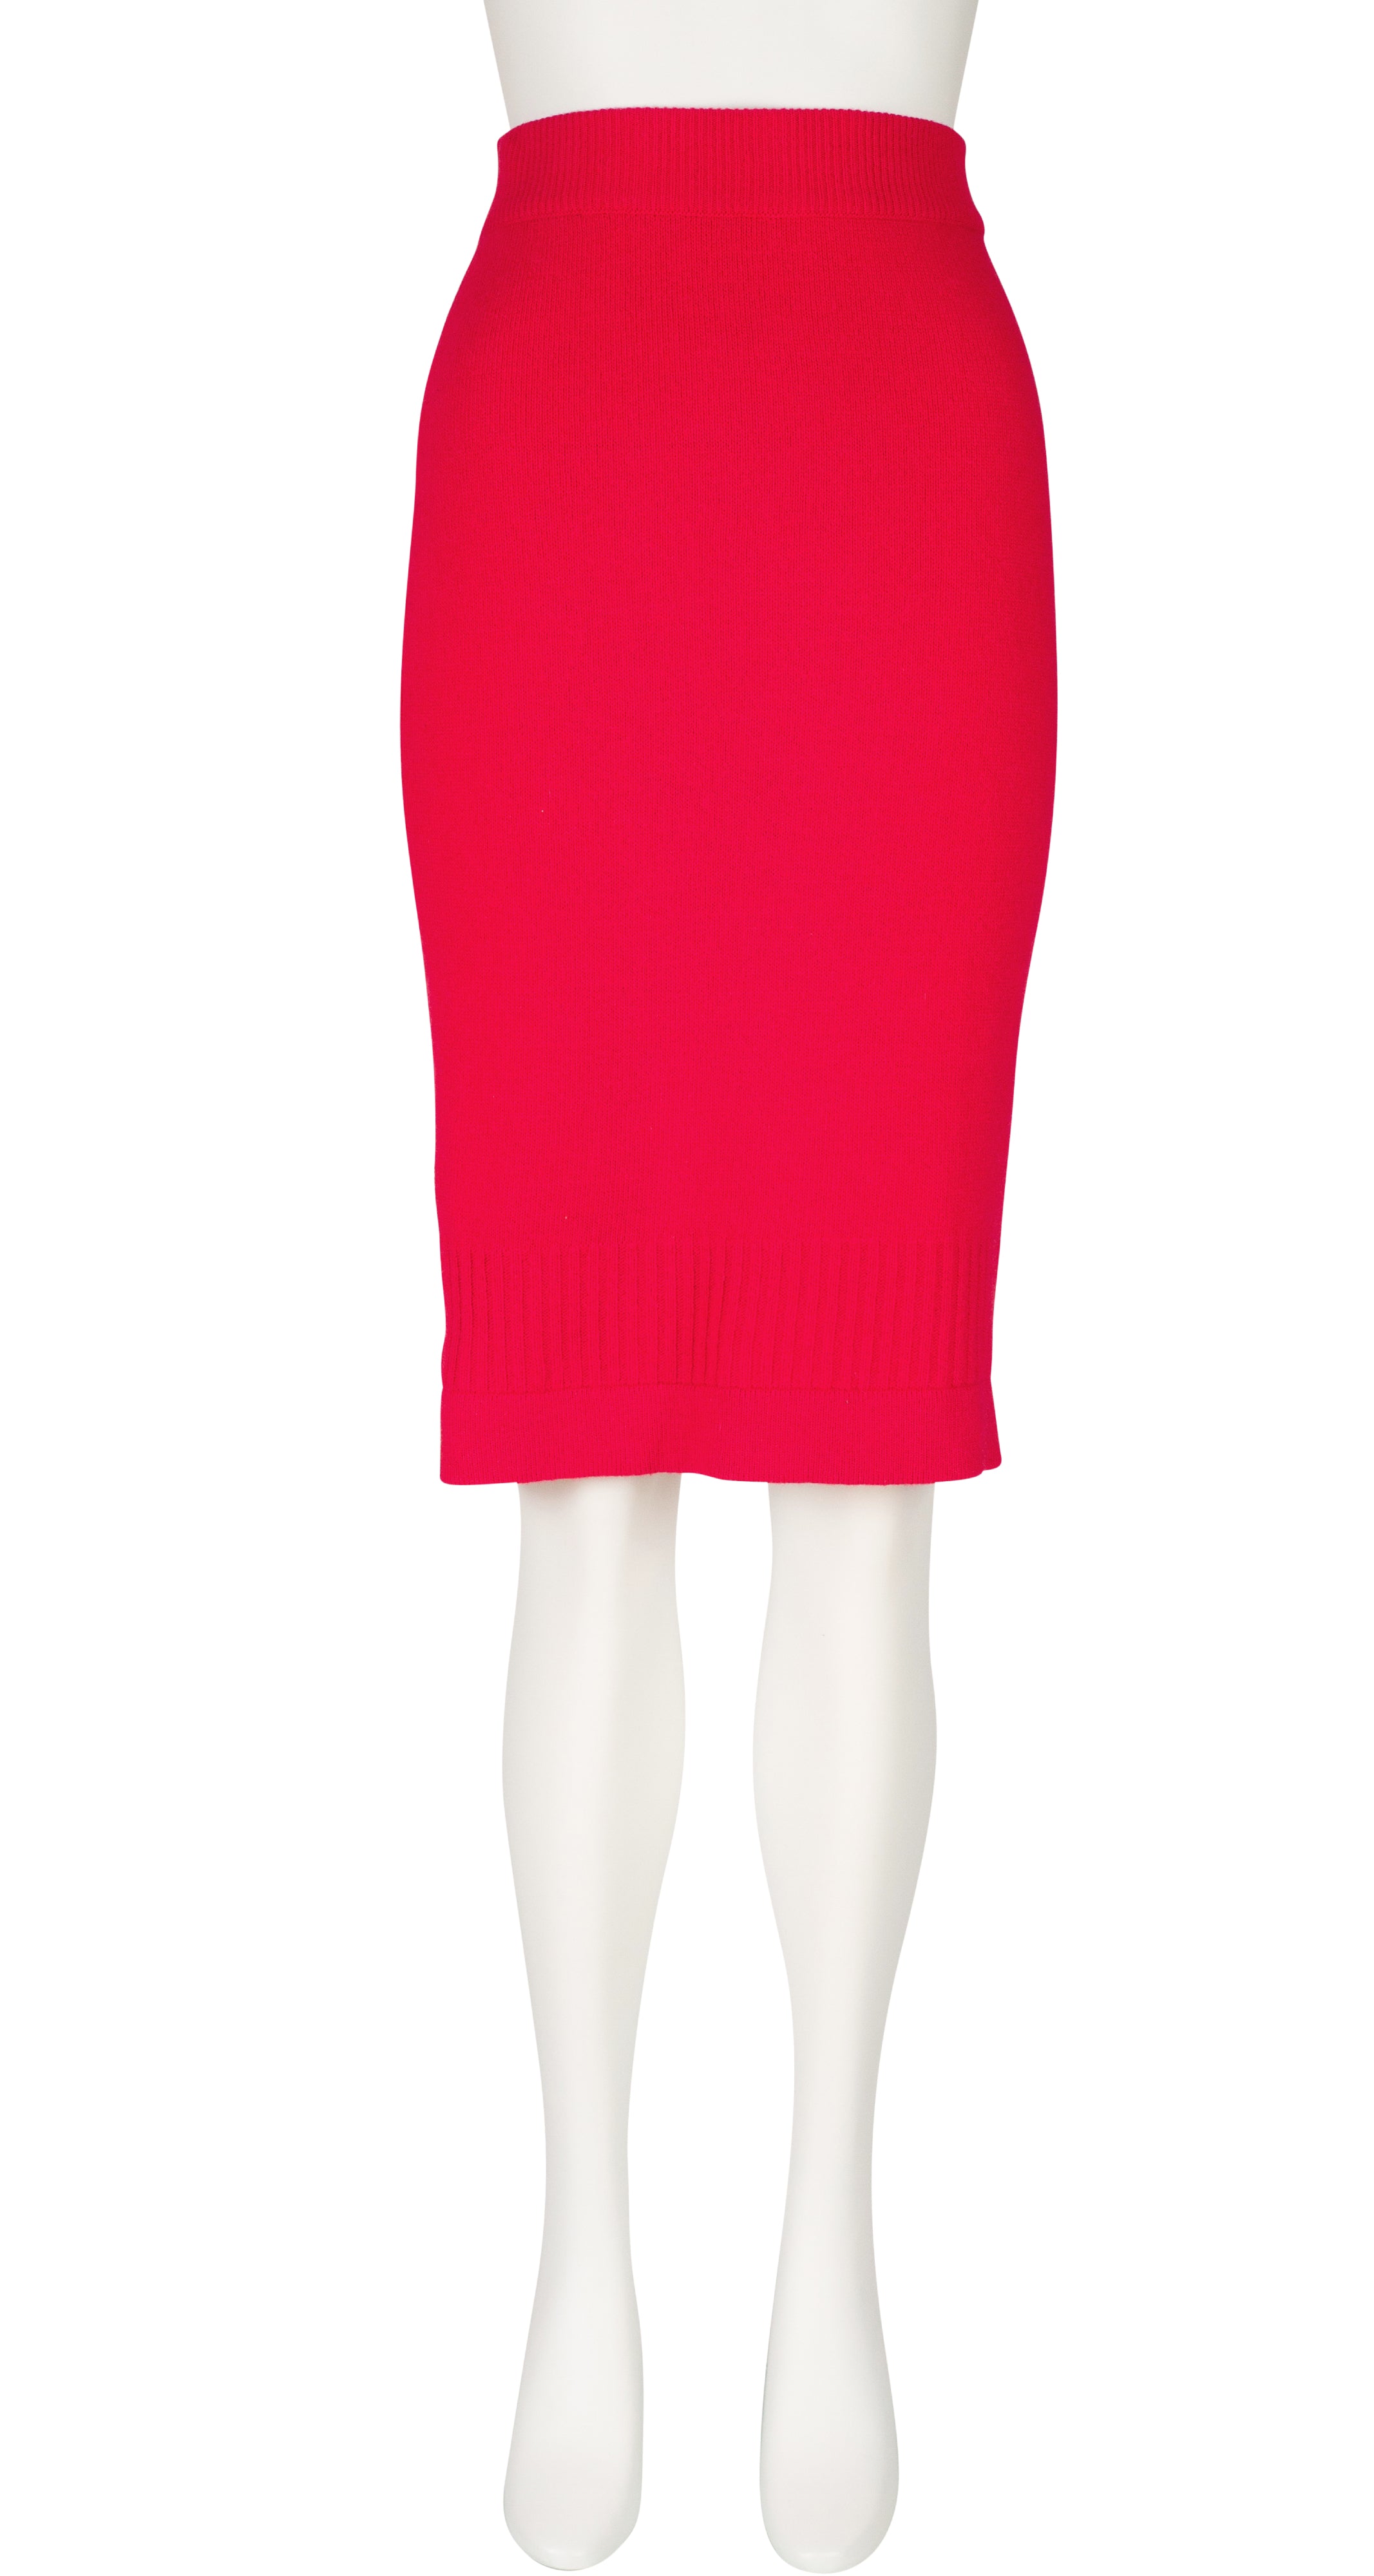 1980s Red Cashmere Knit High-Waisted Pencil Skirt